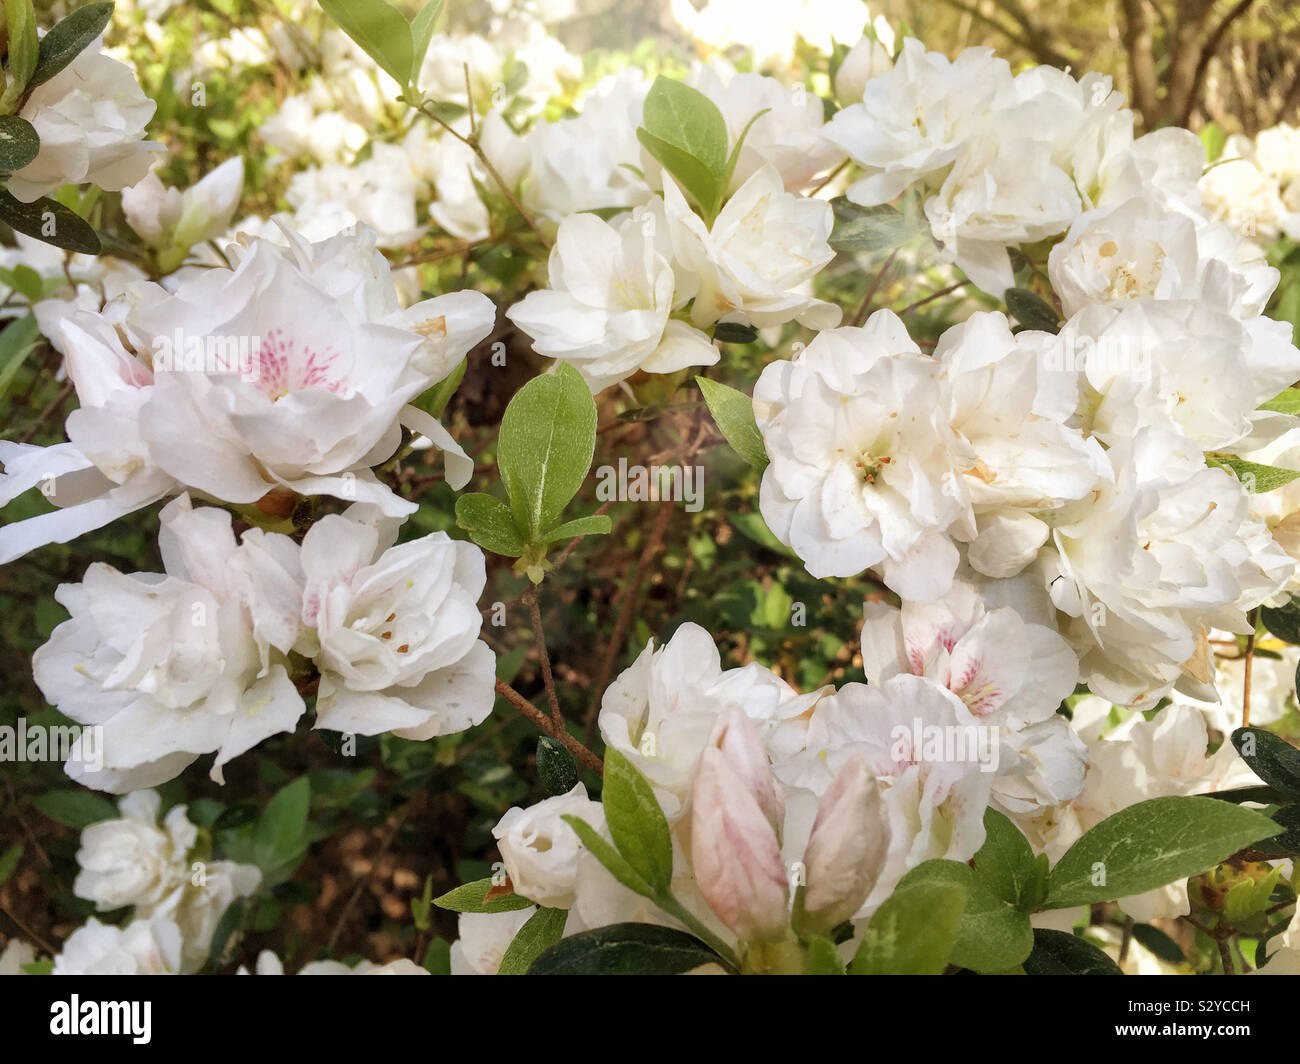 A backyard southern garden filled with white colored azalea flowers in full bloom. This flower has light pink centers. Stock Photo